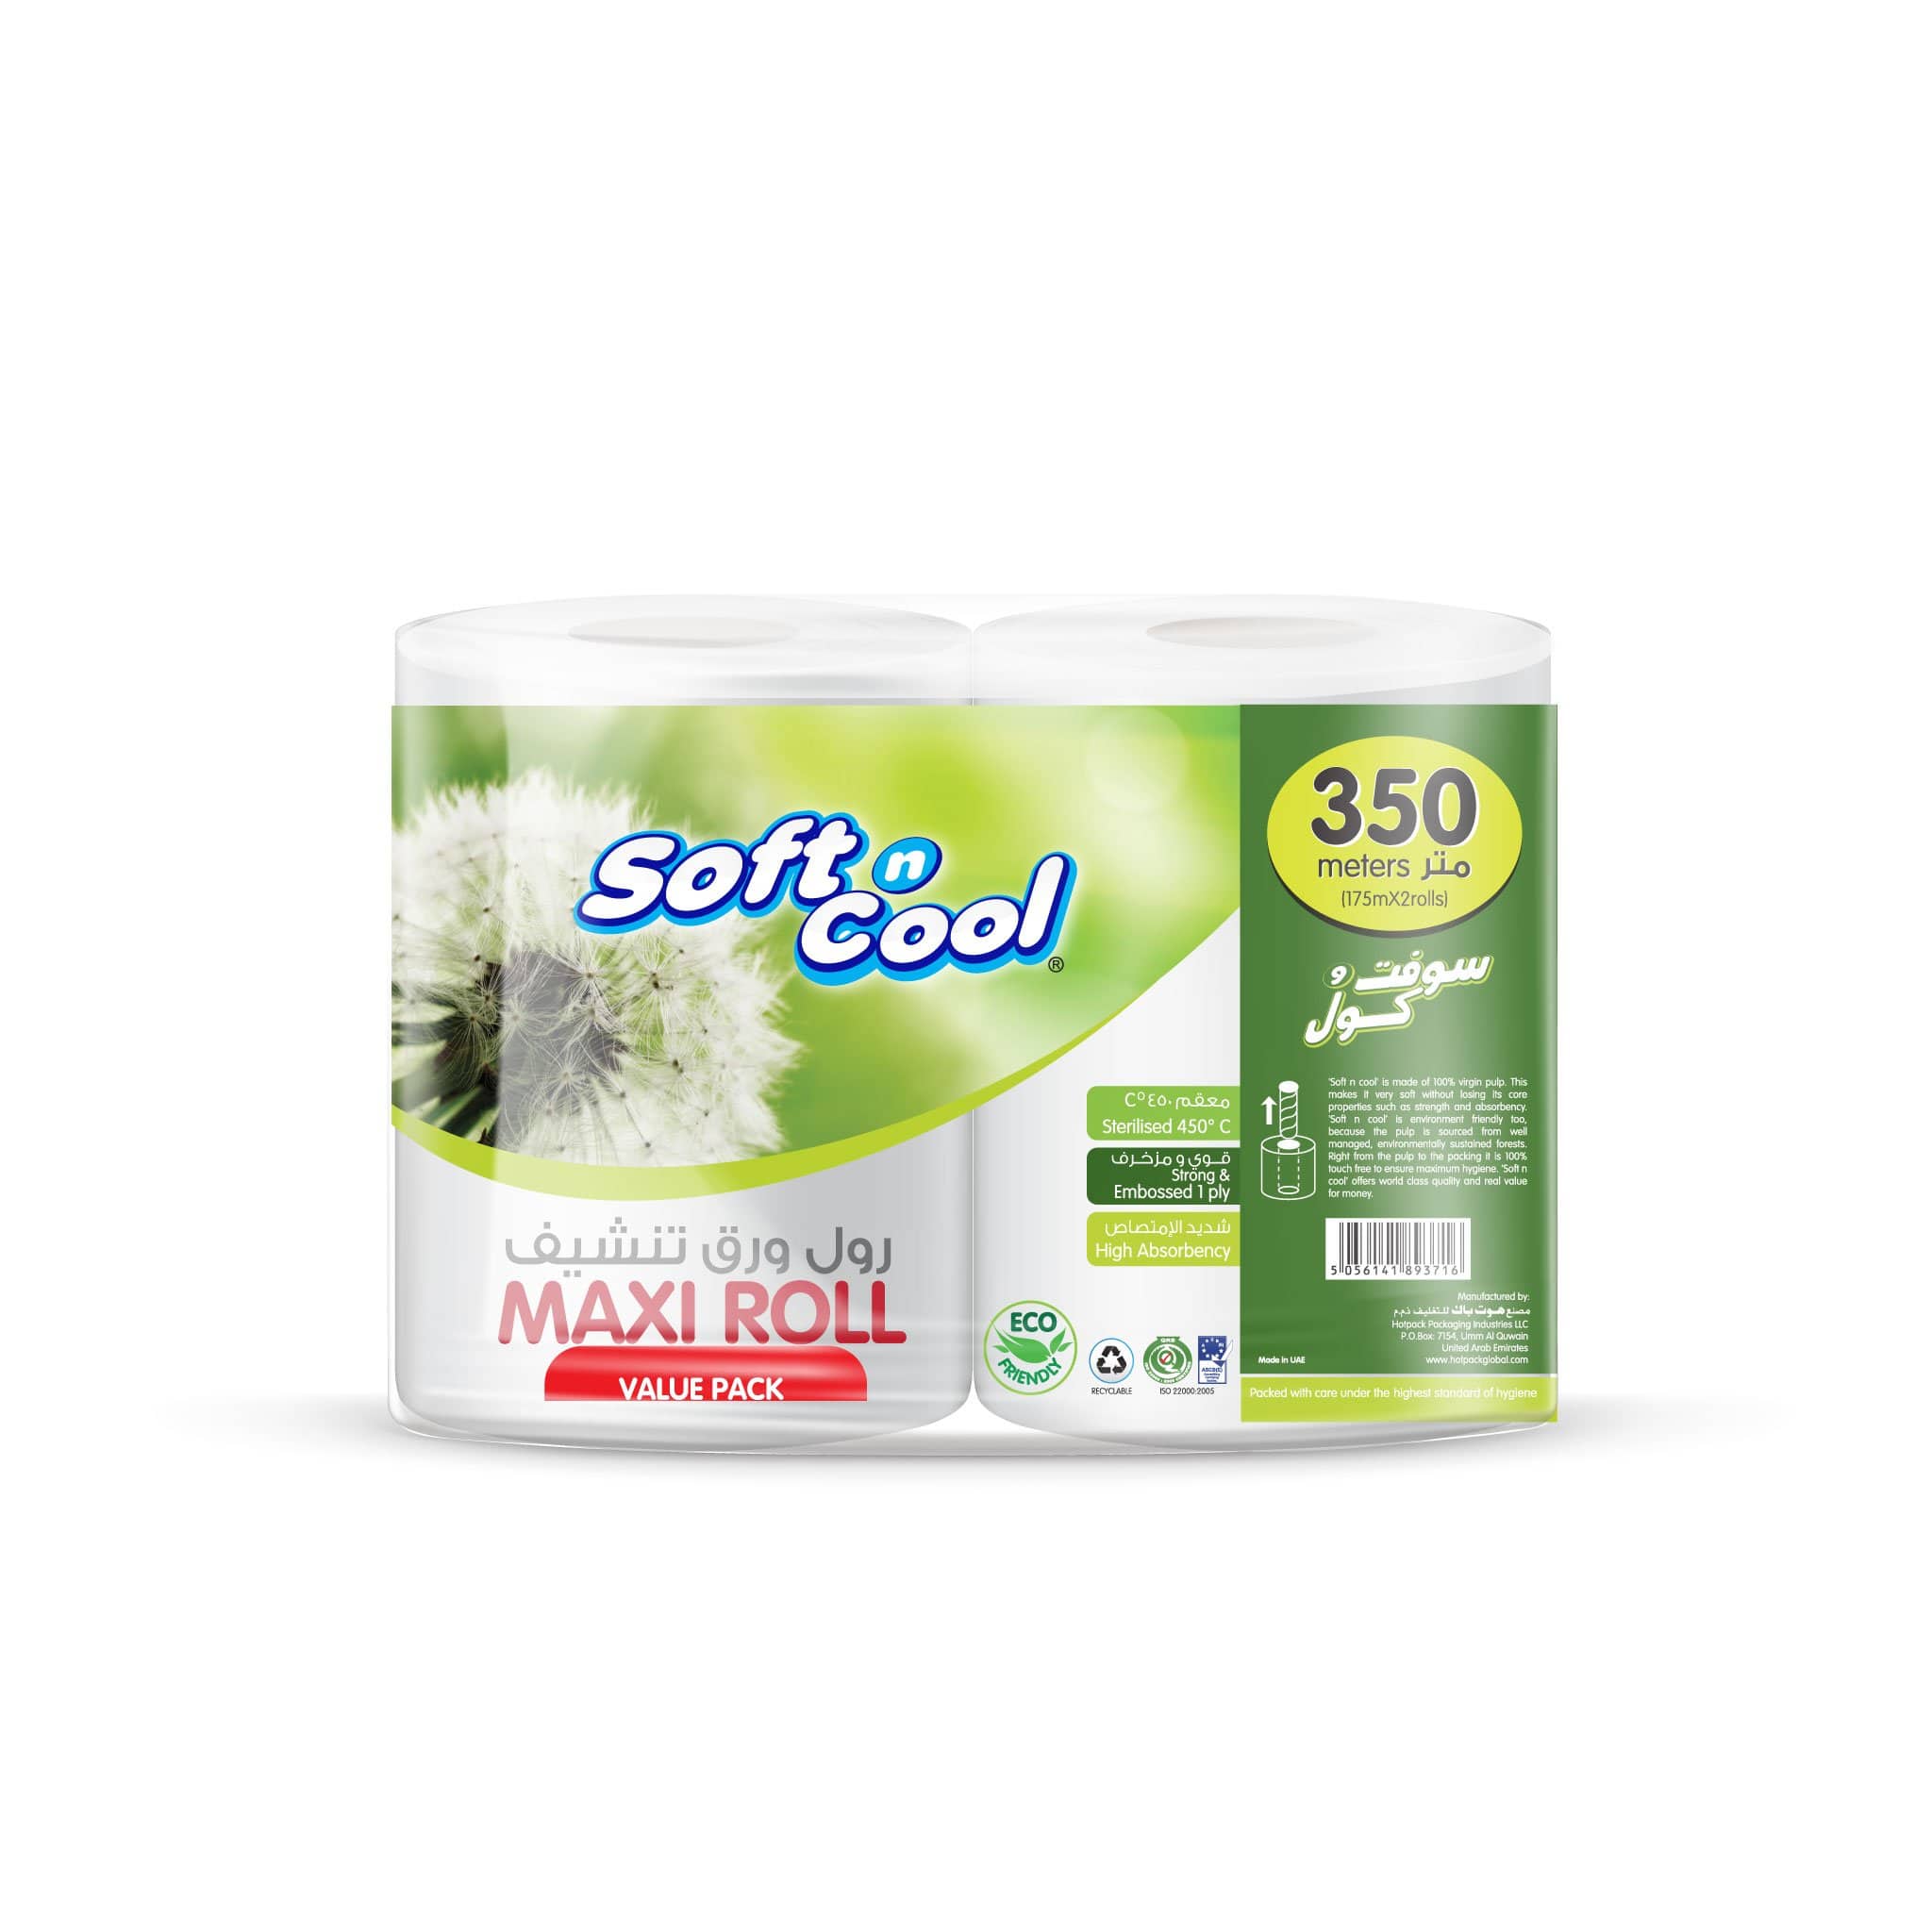 Hotpack| Value Pack Maxi Roll Embossed, 1 Ply- Hotpack Bahrain